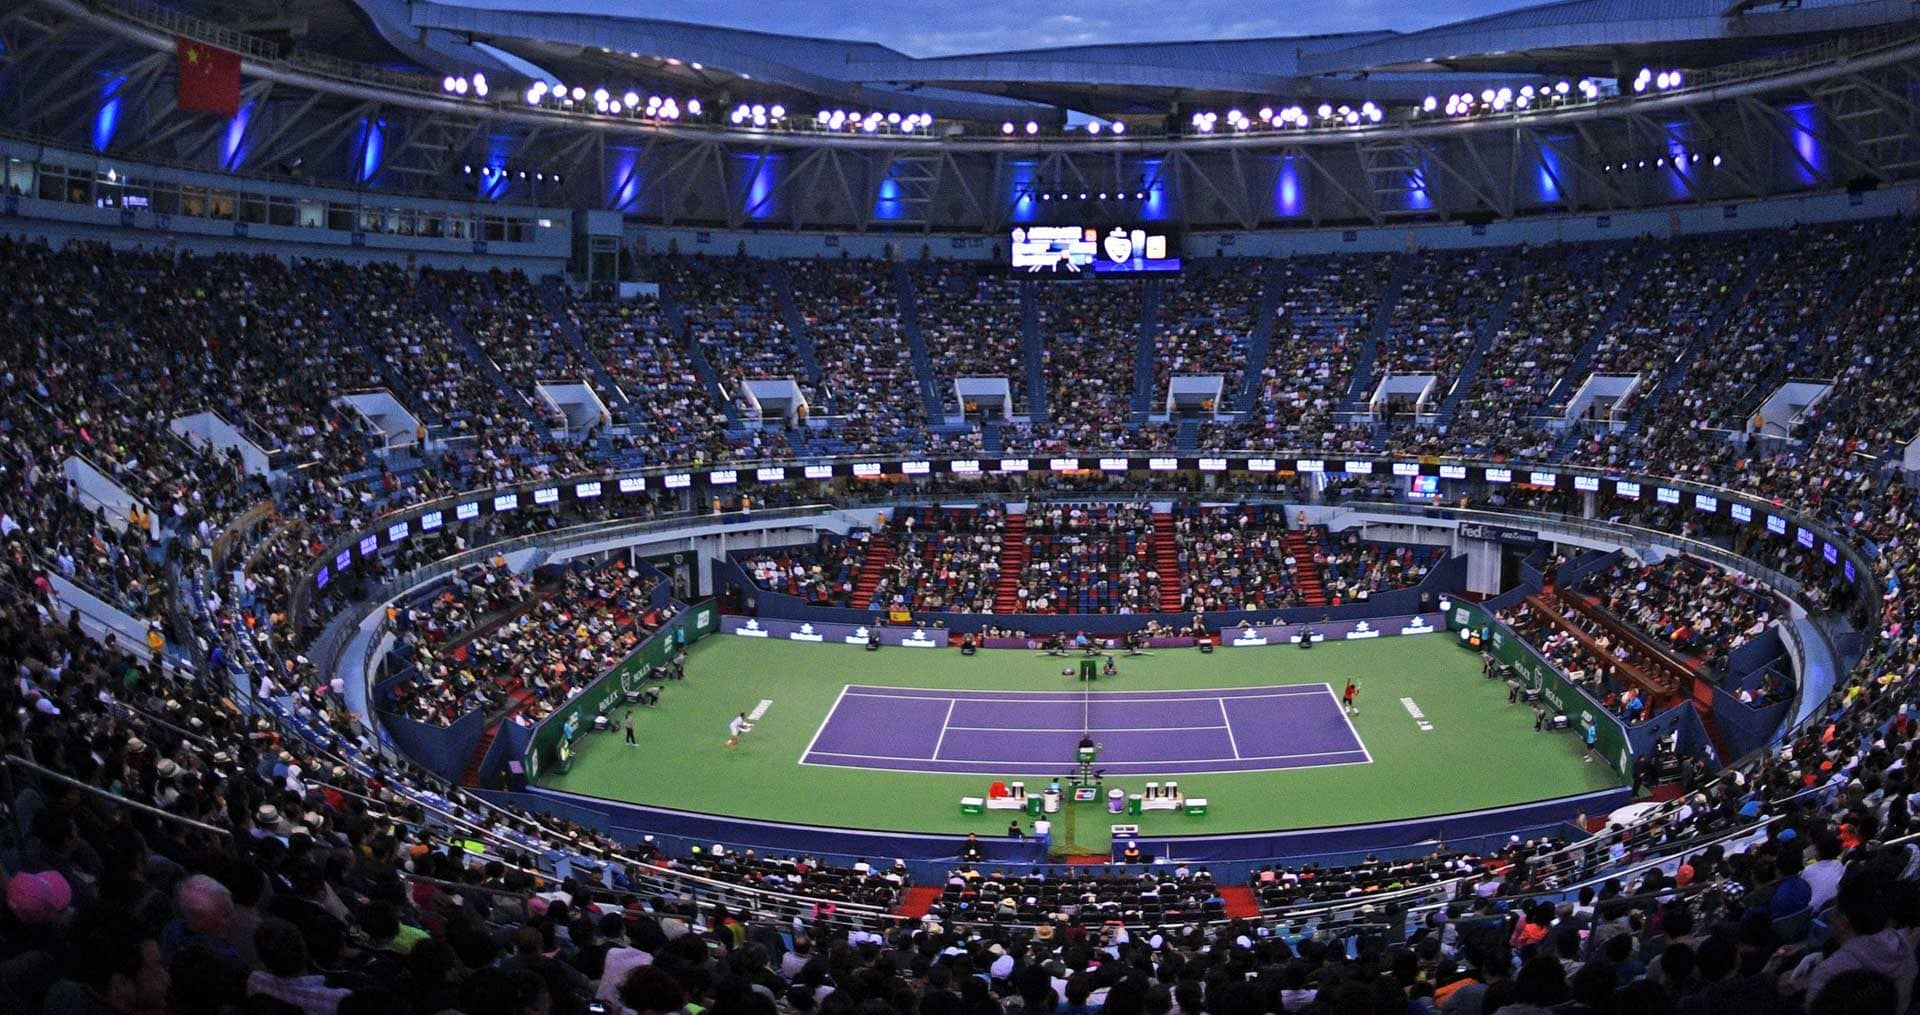 Atp World Tour Finals Points And Prize Money - Wasfa Blog